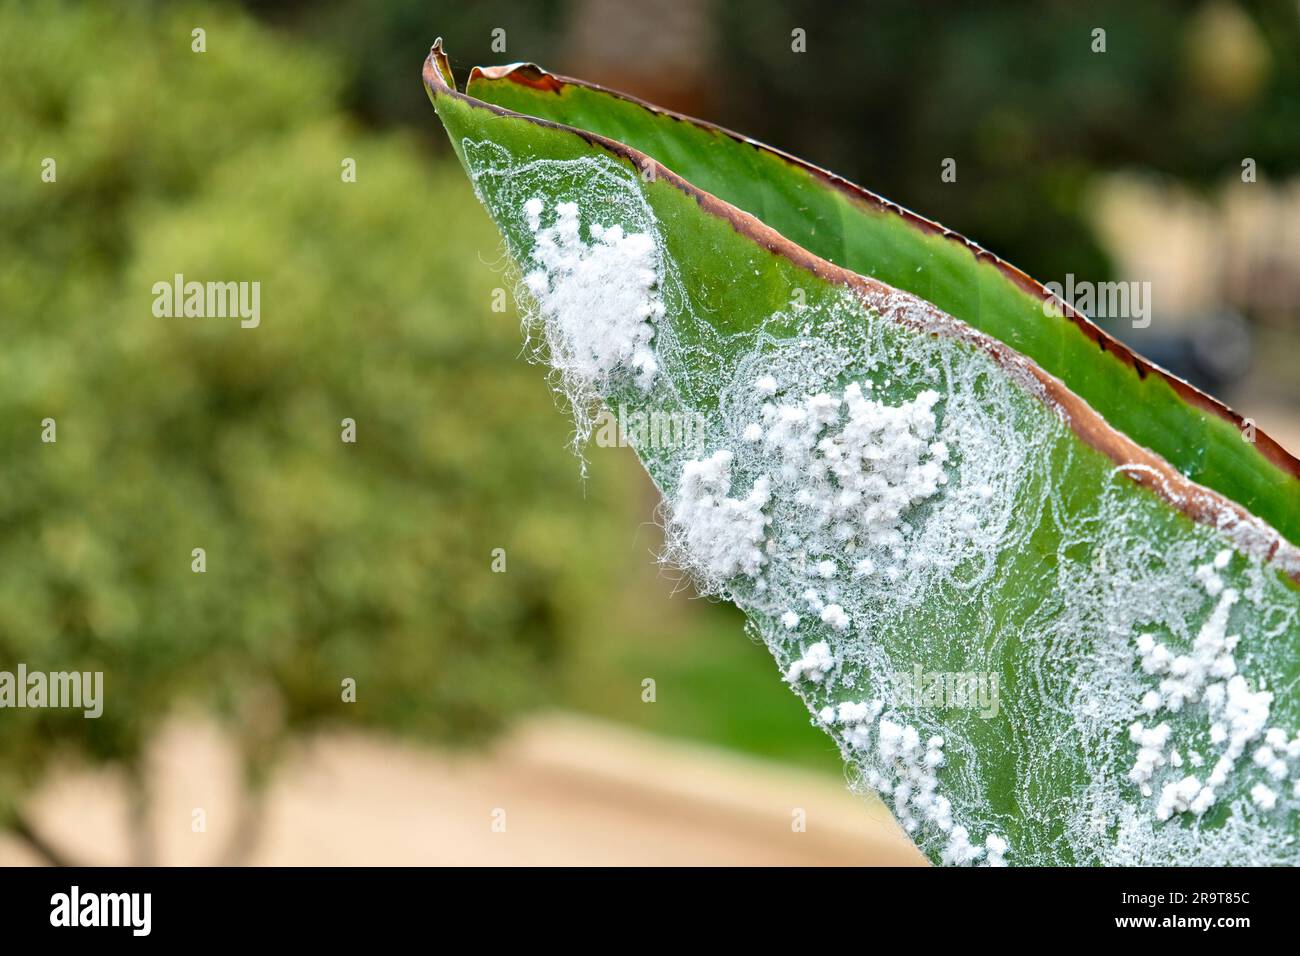 Colony of insects, woolly aphids (Eriosomatinae), infected banana plant leaf. Stock Photo